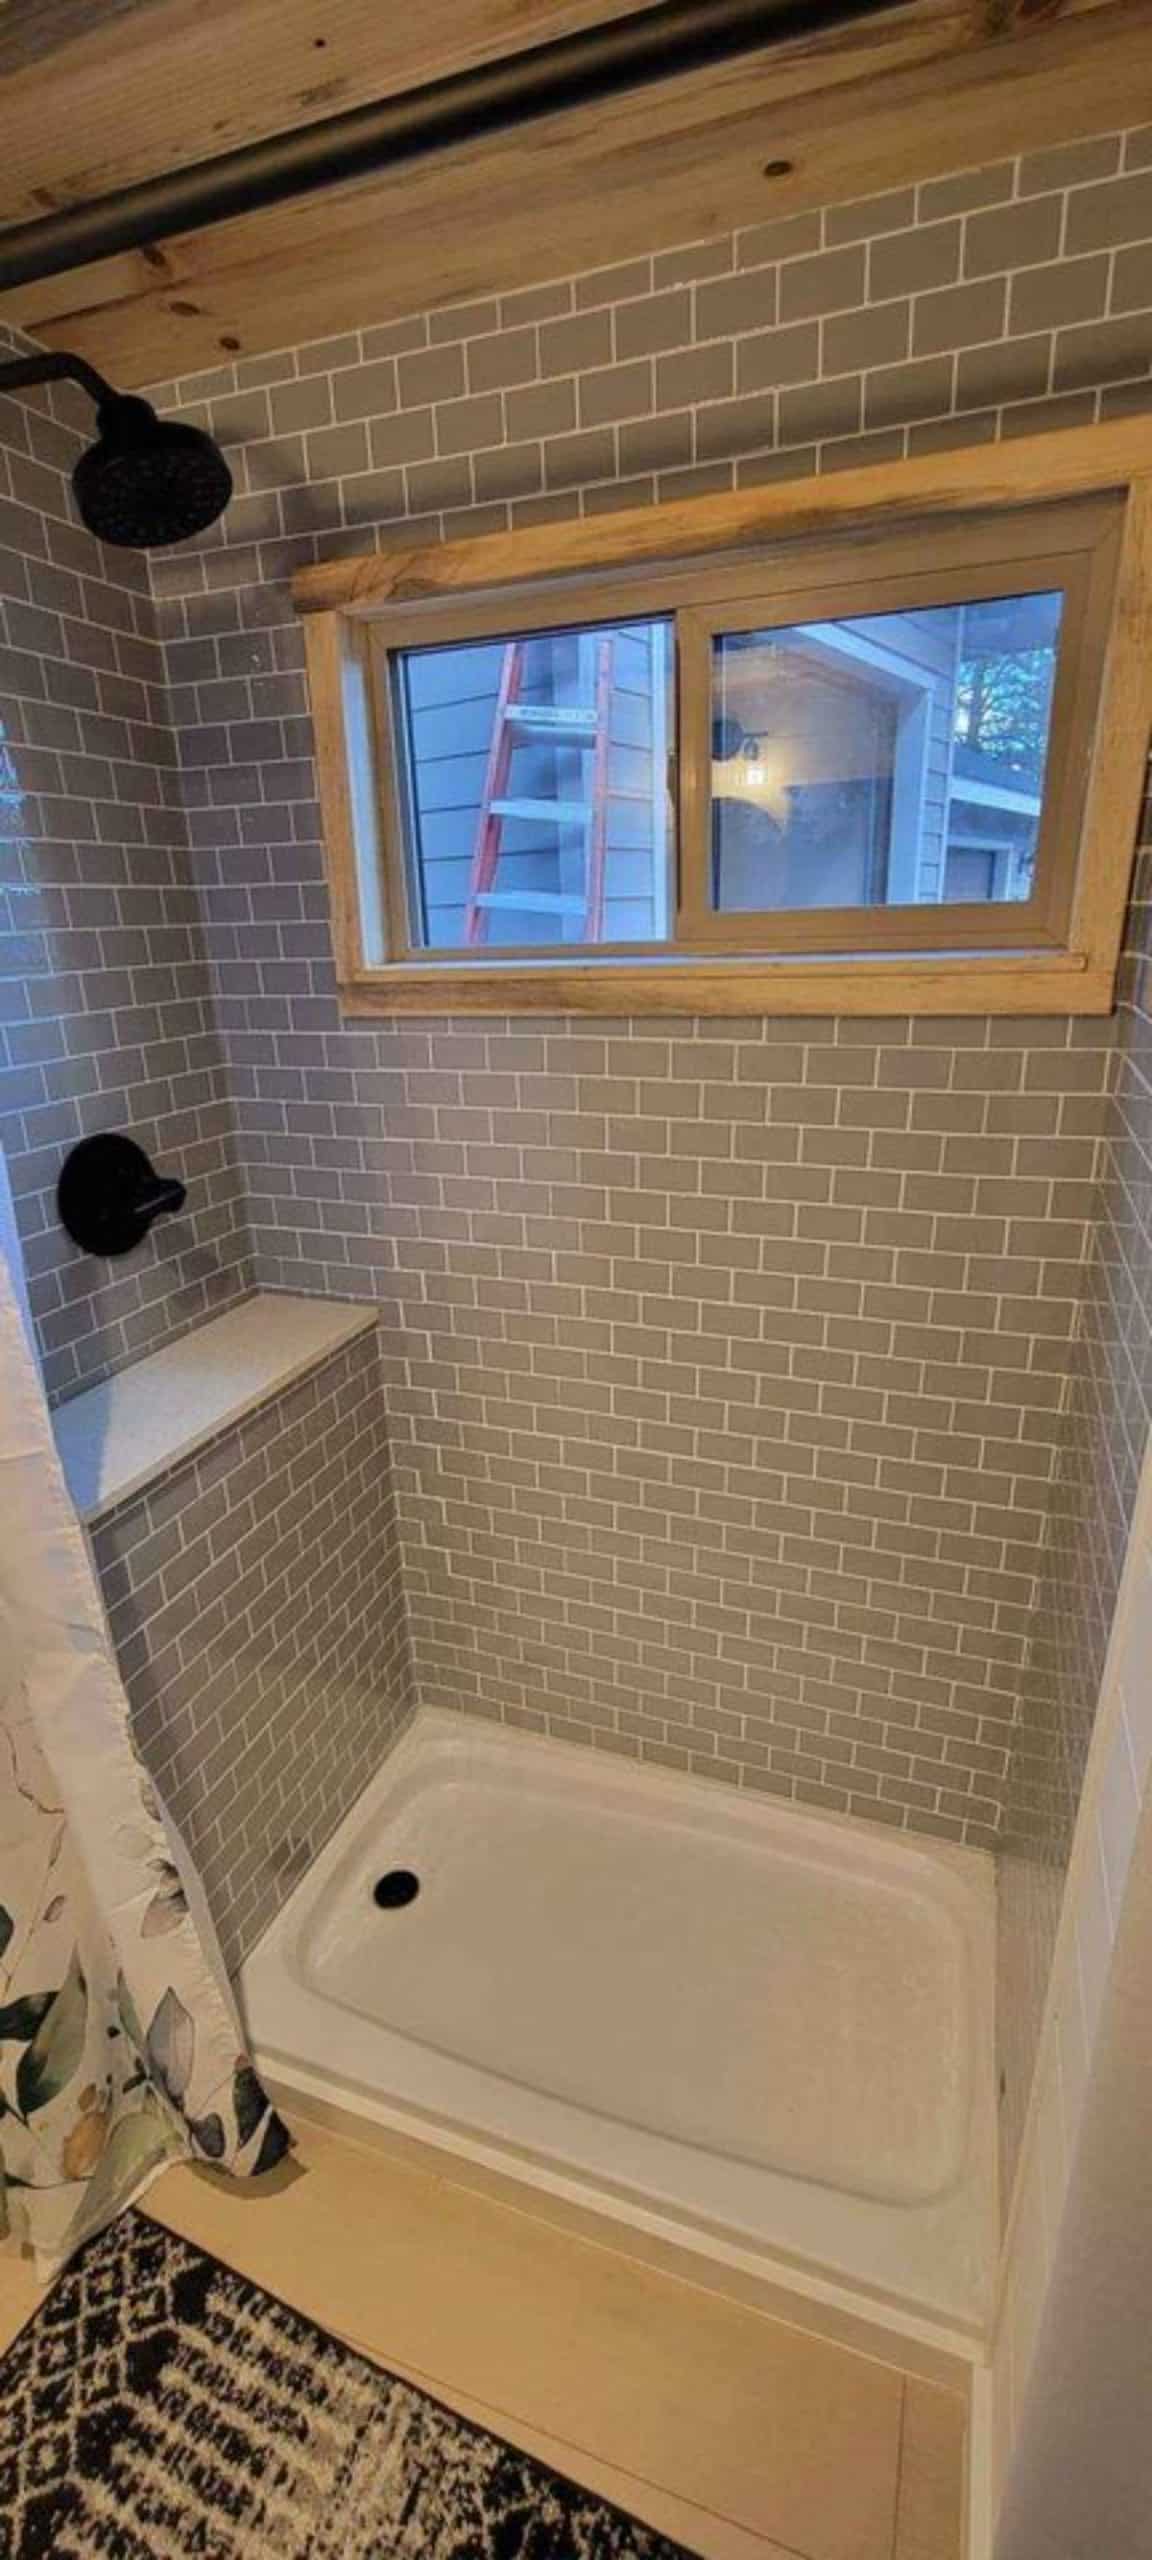 Separate shower area in bathroom of tiny home in Arizona